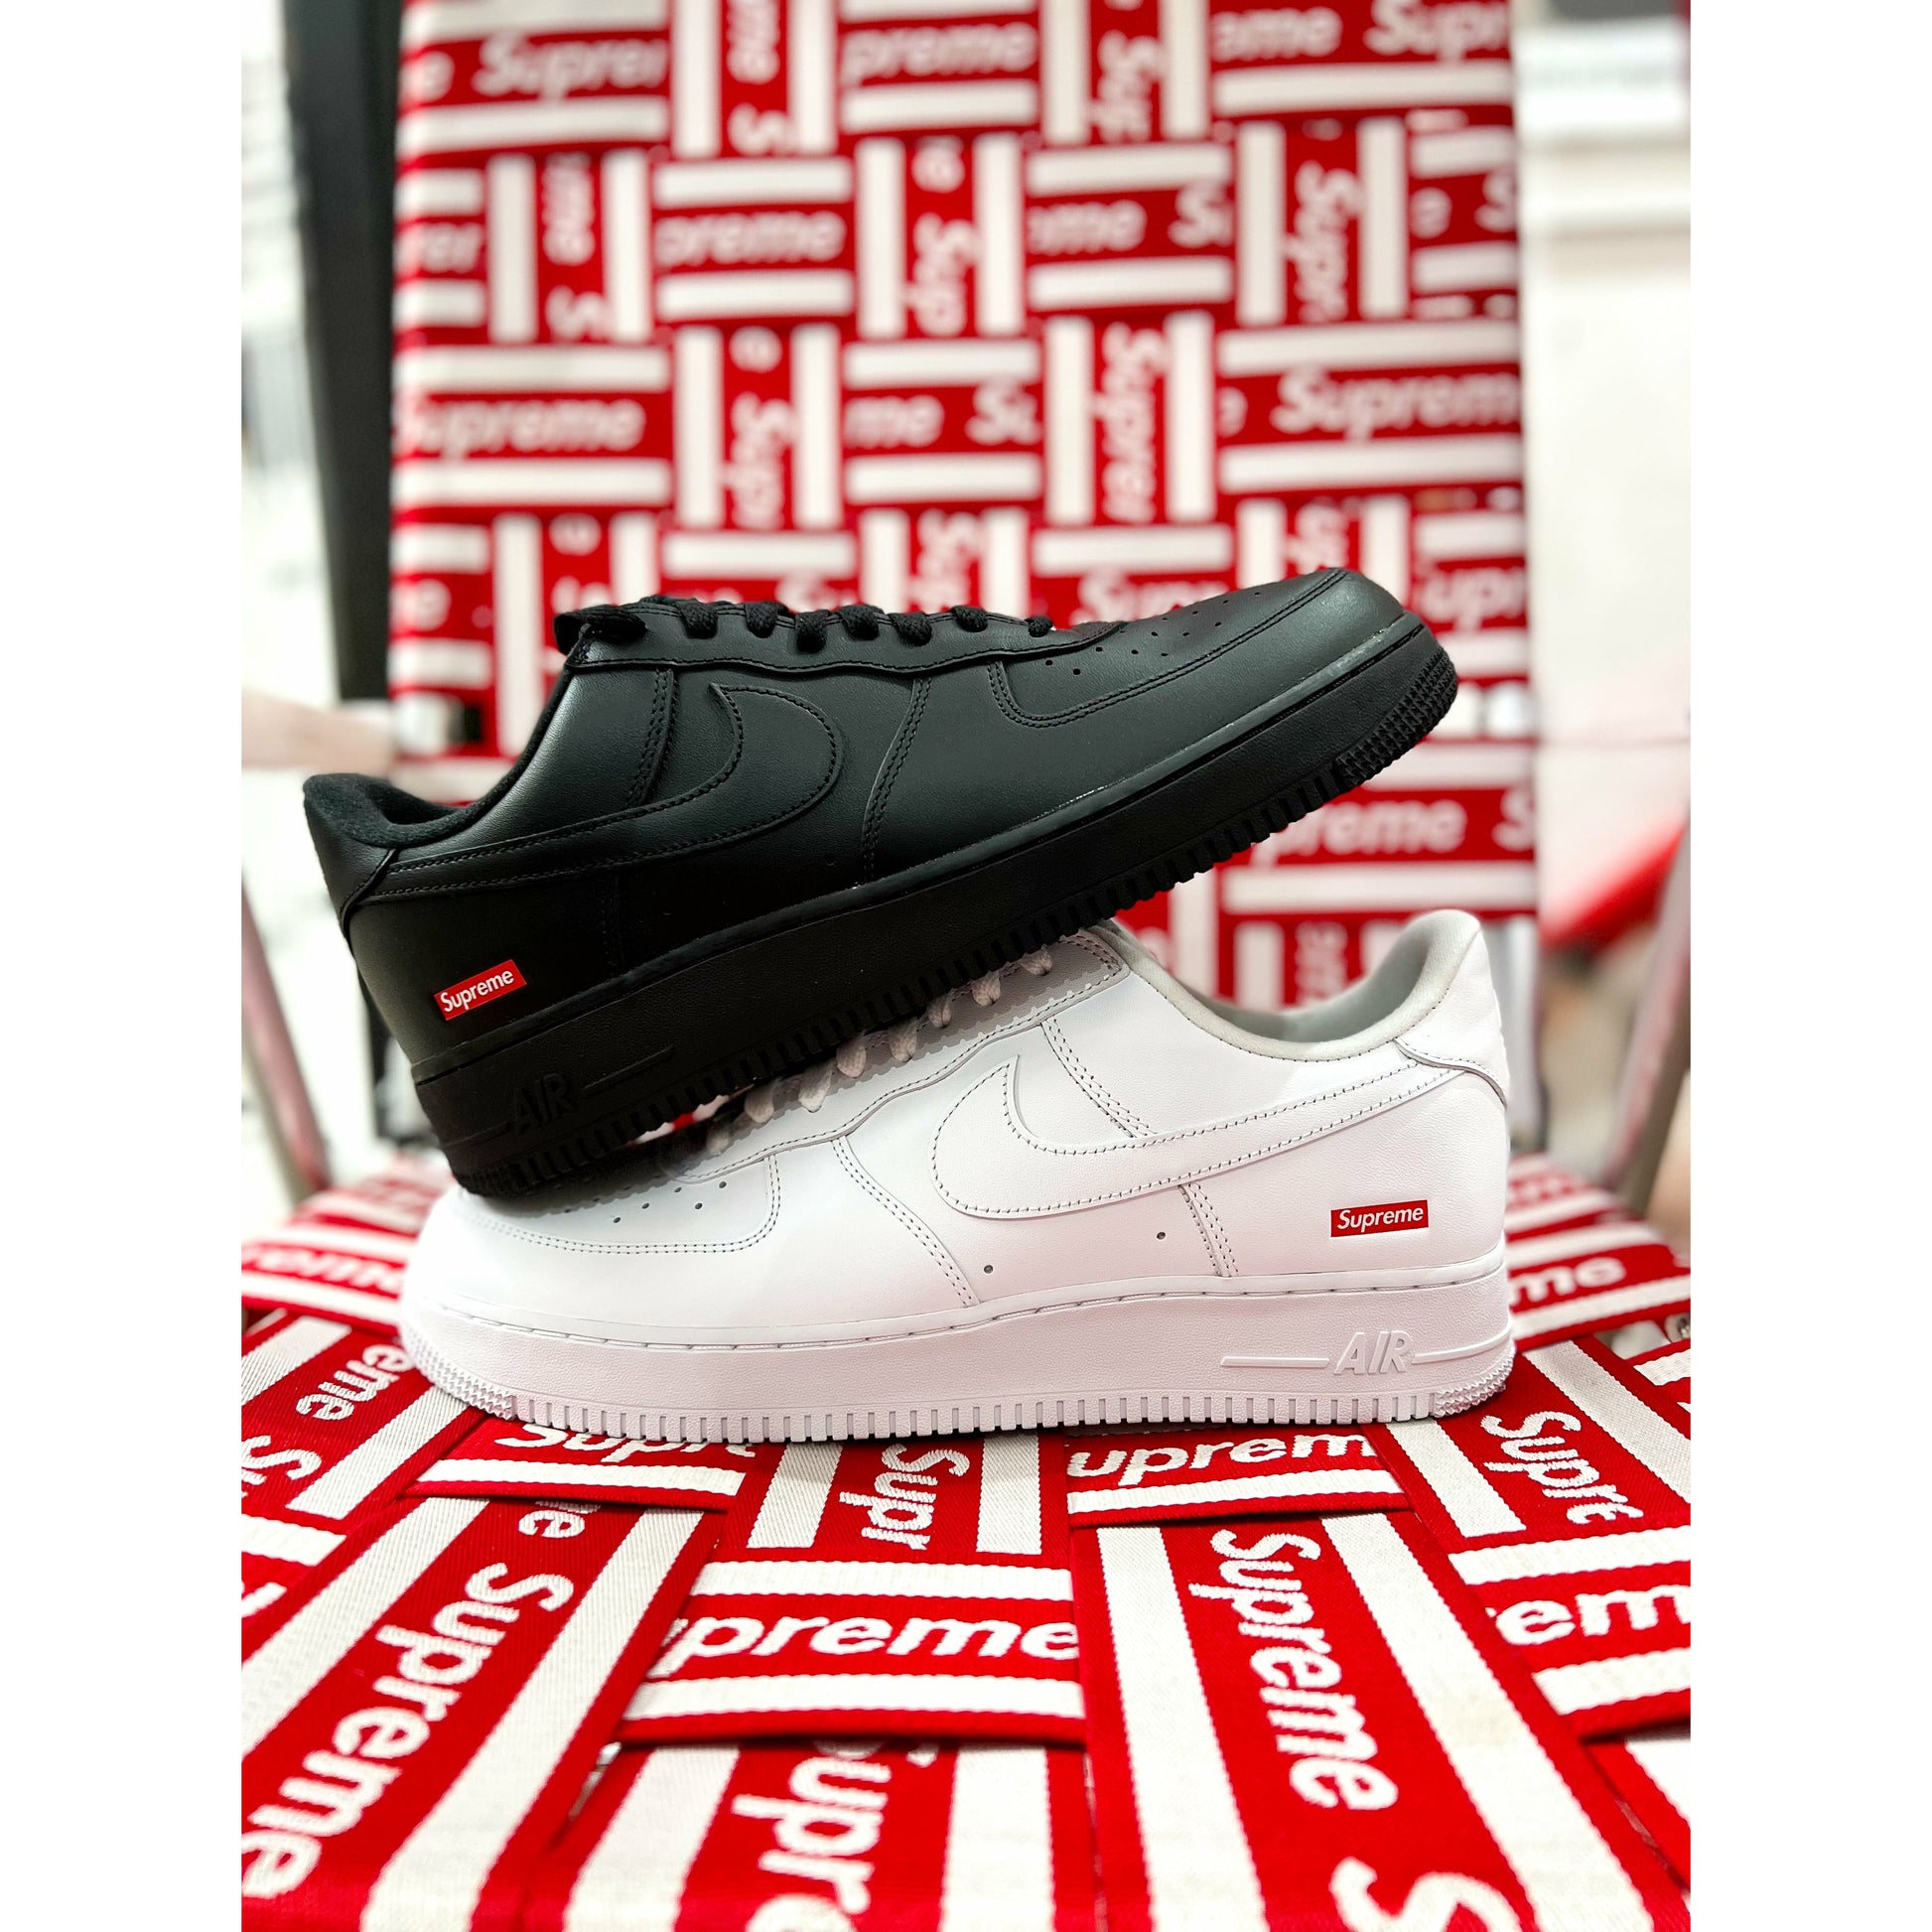 Nike Air Force 1 Low Supreme White by Nike from £166.99